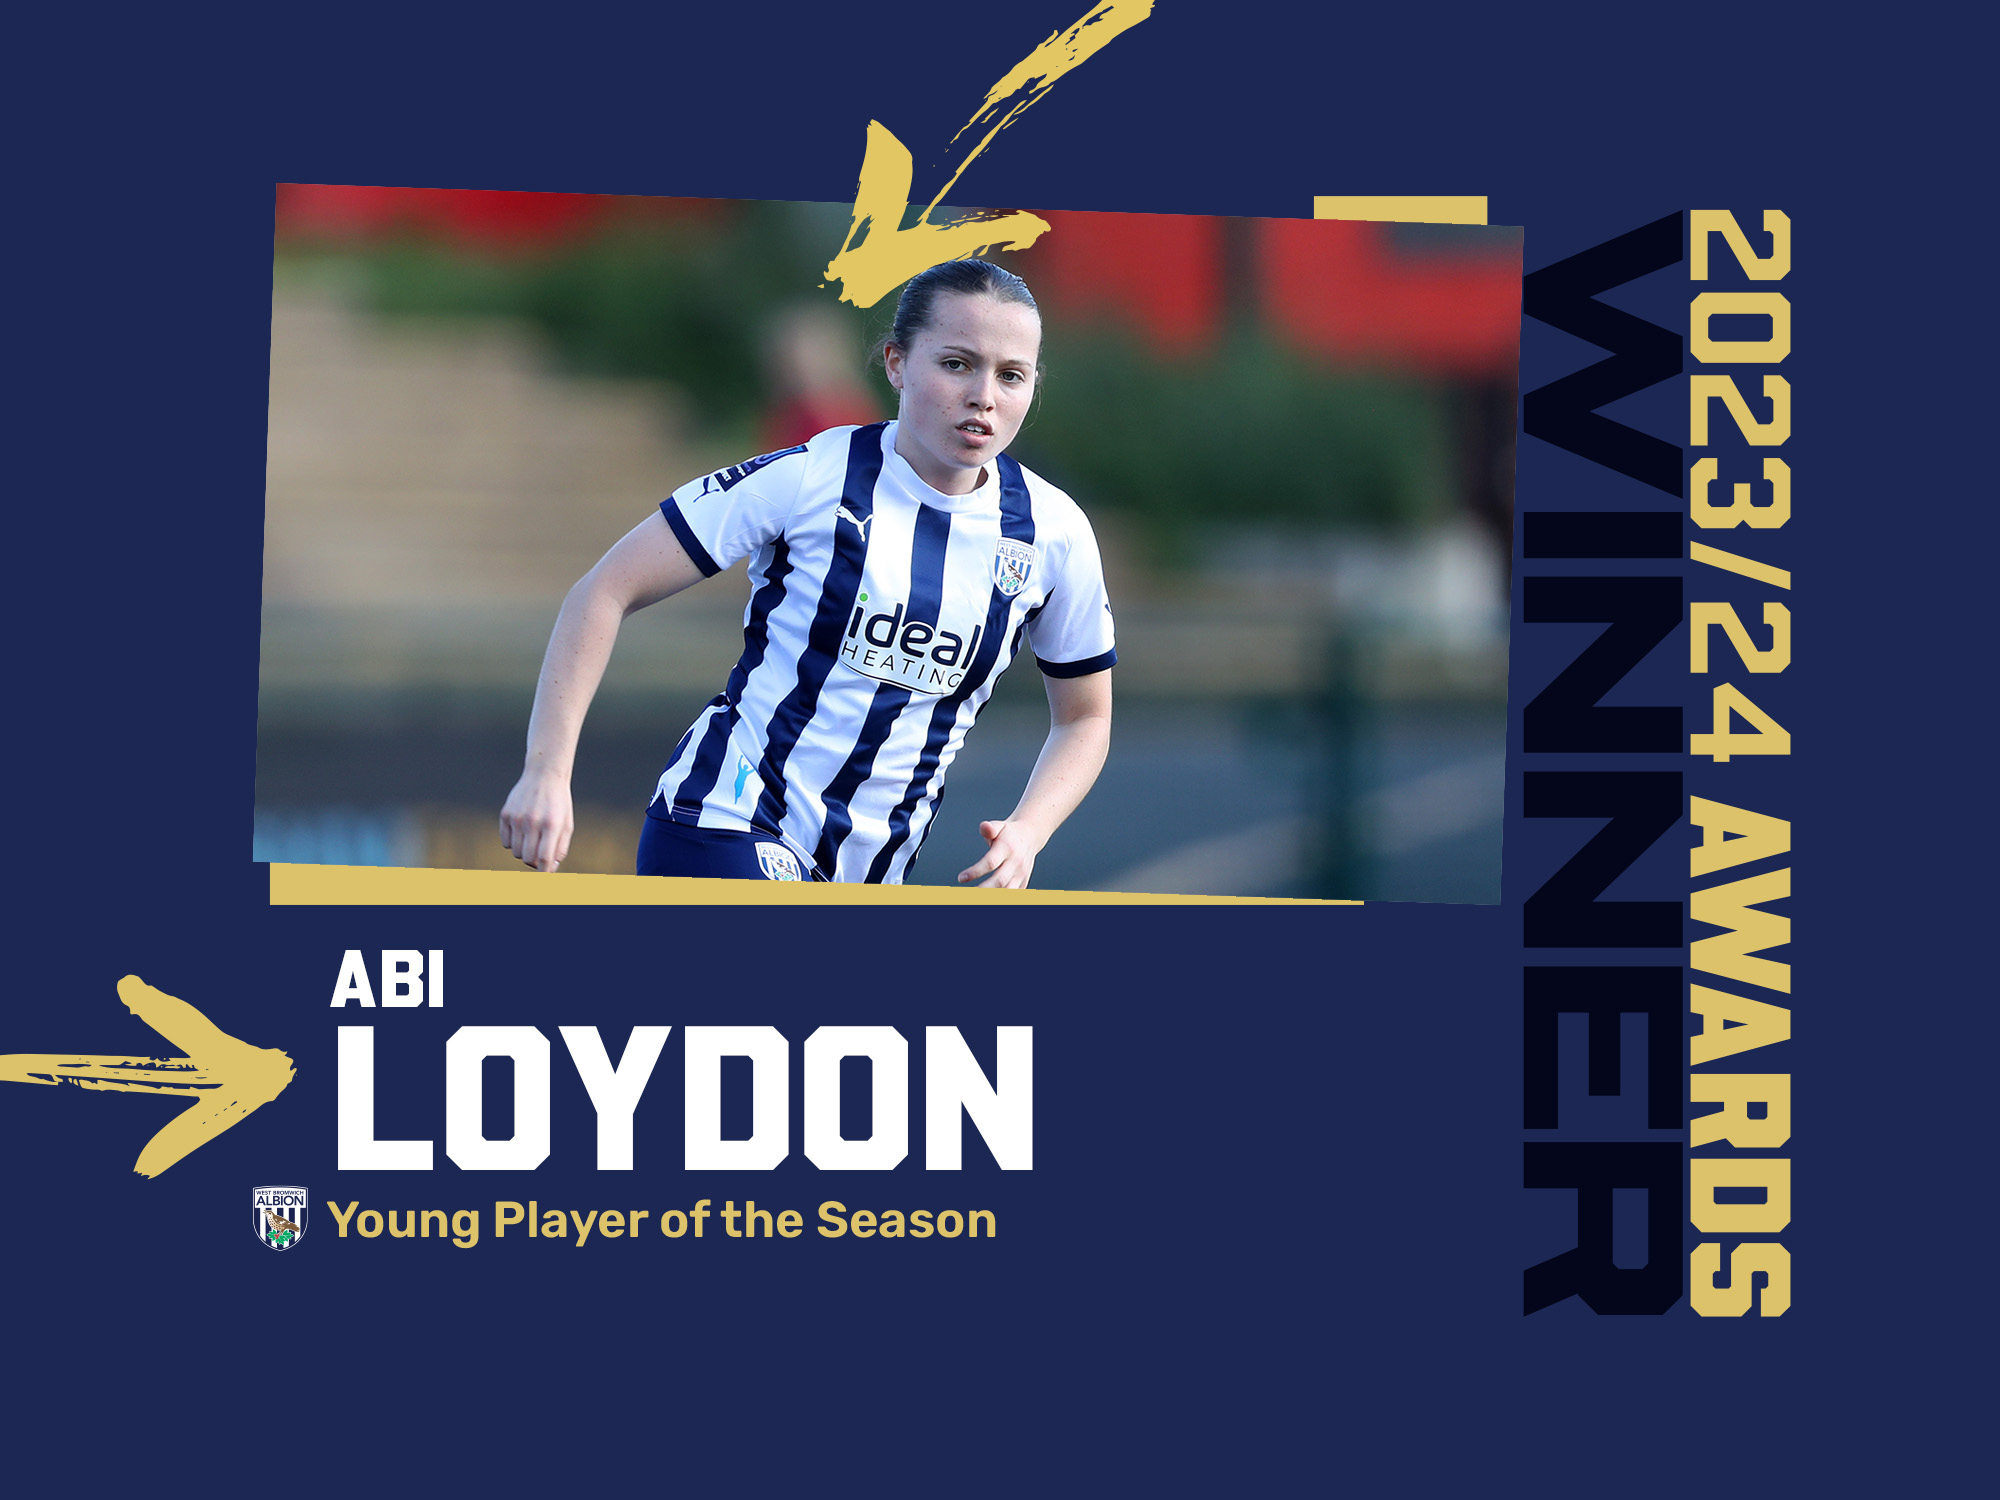 Abi Loydon's Albion Women's Young Player of the Season graphic with an image of her playing in the home kit on